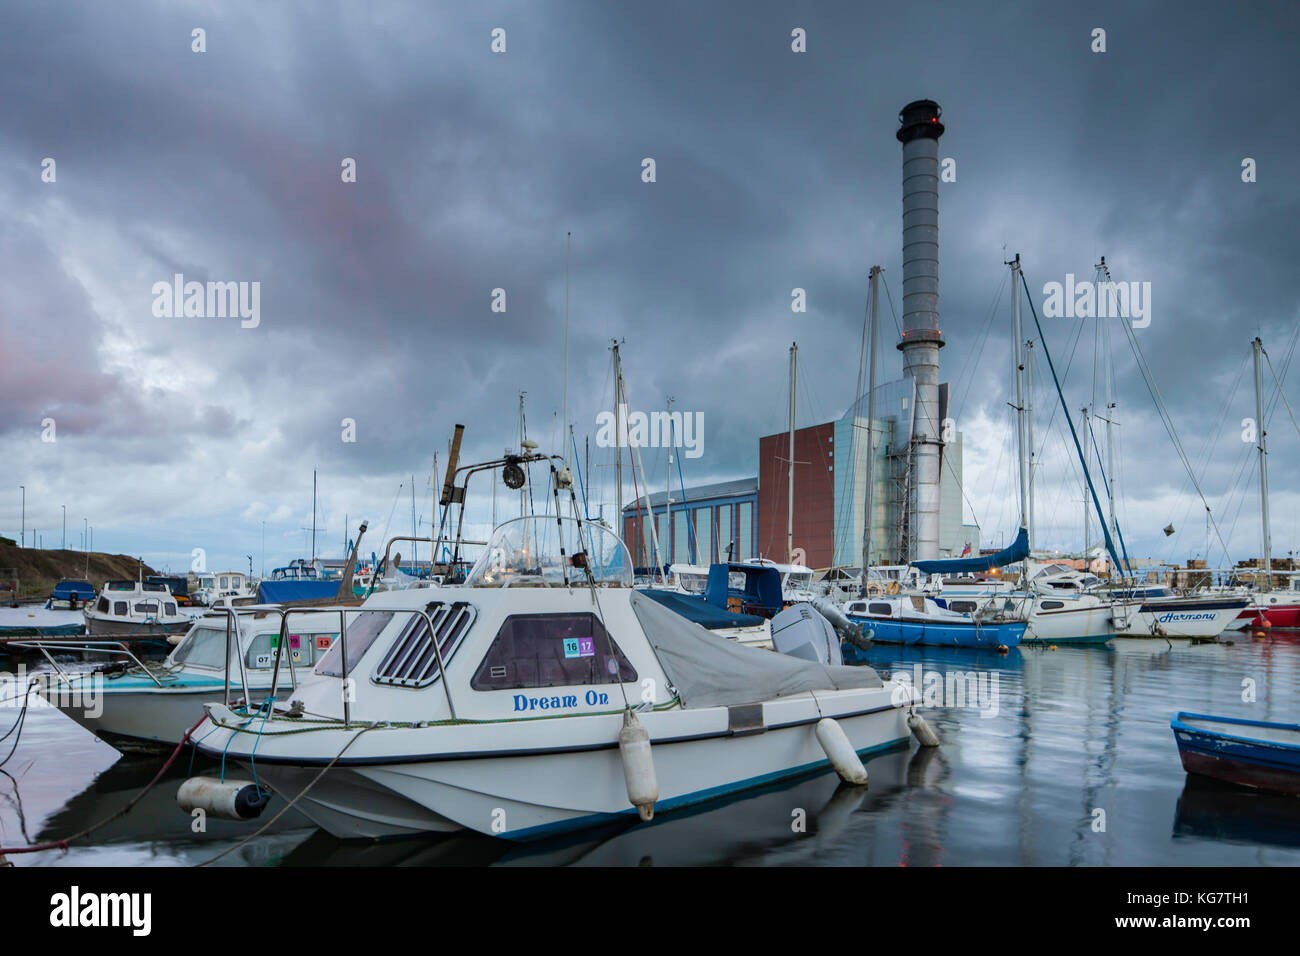 Stormy sky over Shoreham Port in Southwick, West Sussex, England. Stock Photo